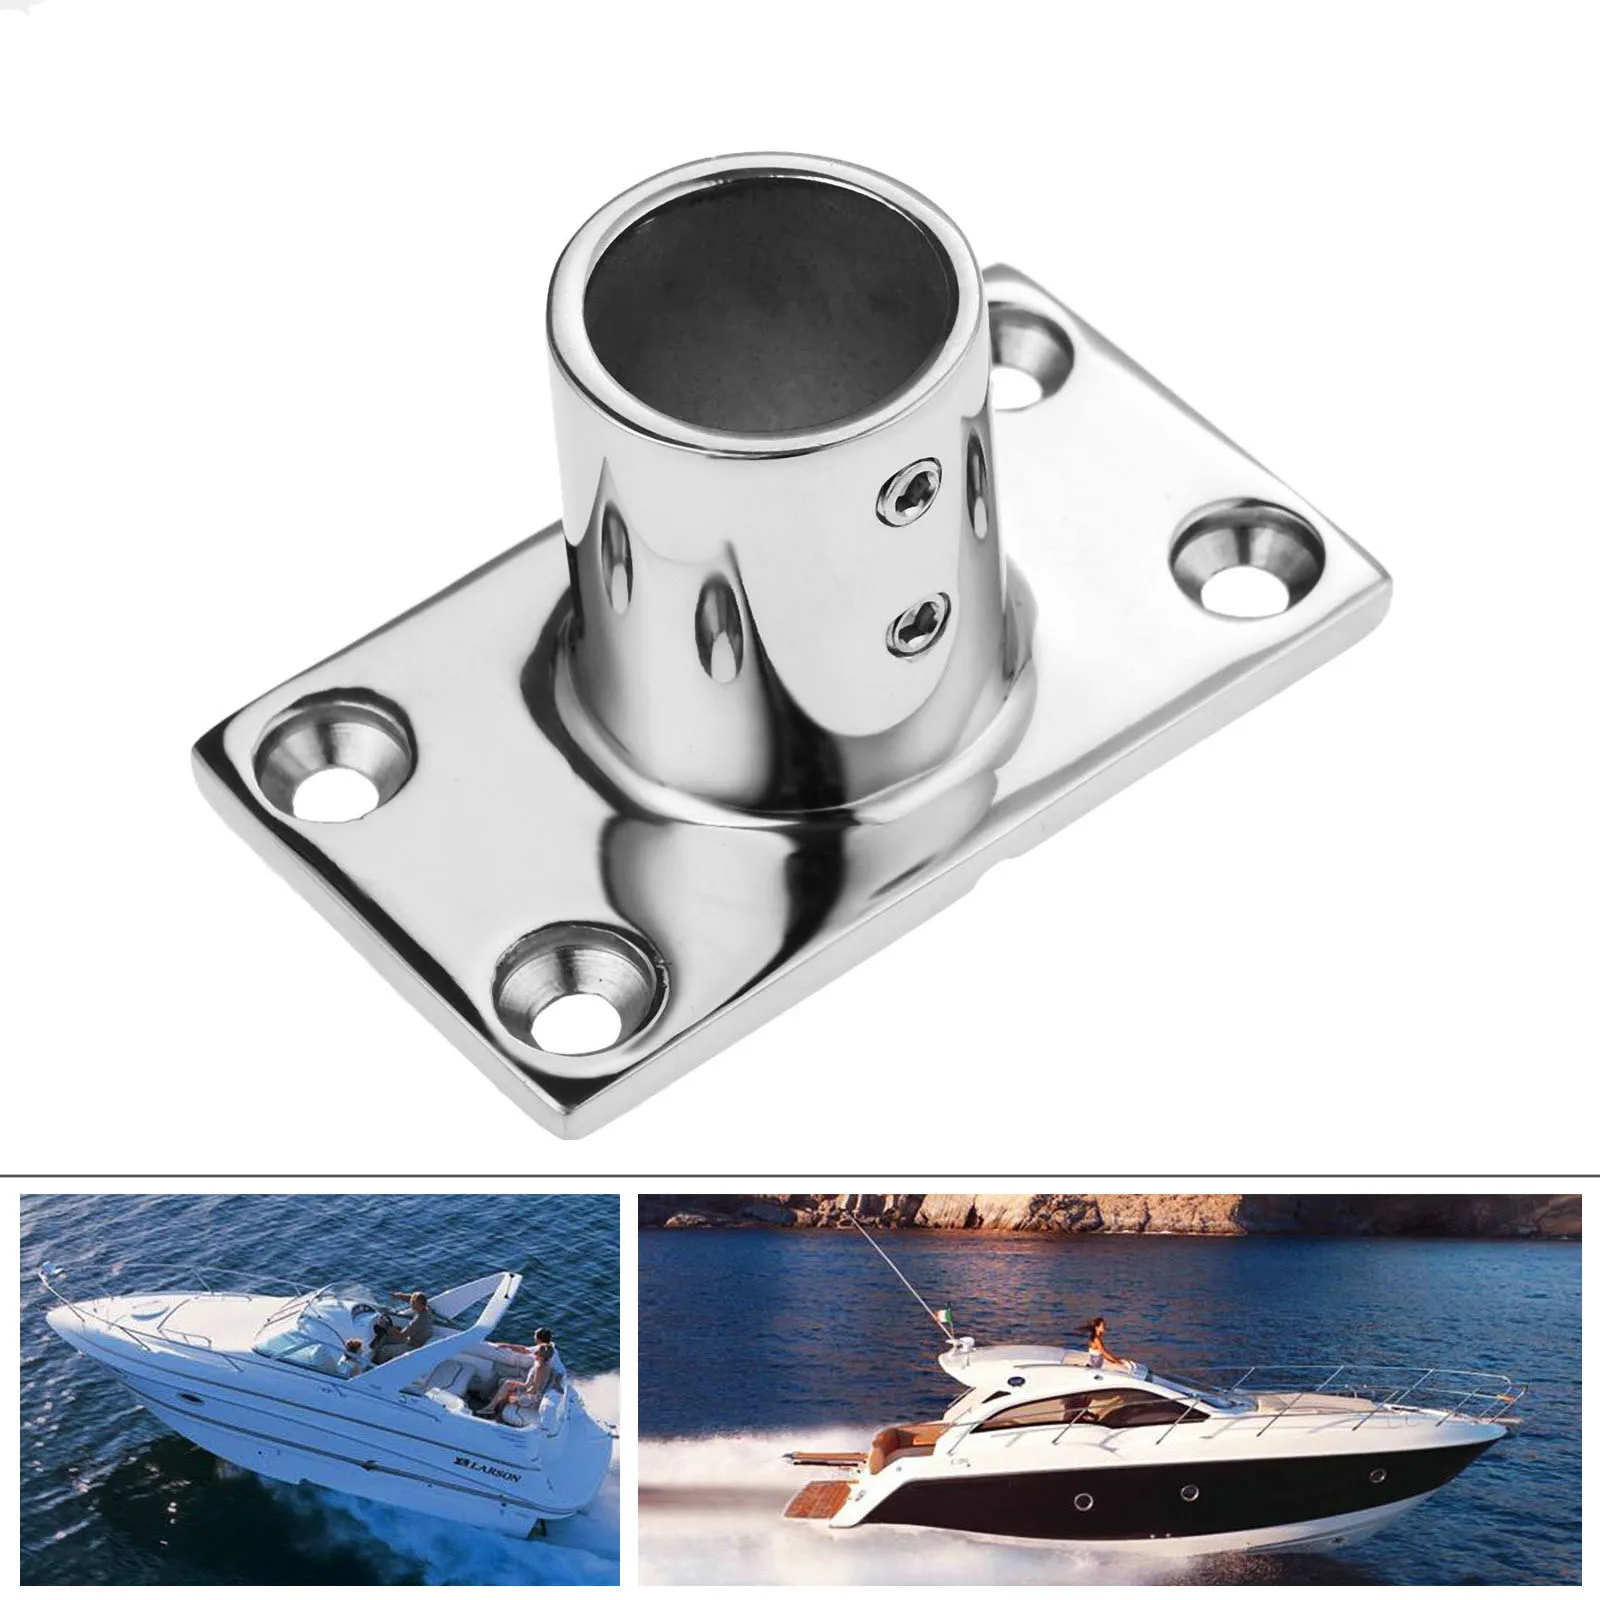 

316 Stainless Steel Marine Boat Hand Rail Fitting 90 Degree Rectangular Stanchion Base For 1"" 25mm Pipe Tube Boats Accessories